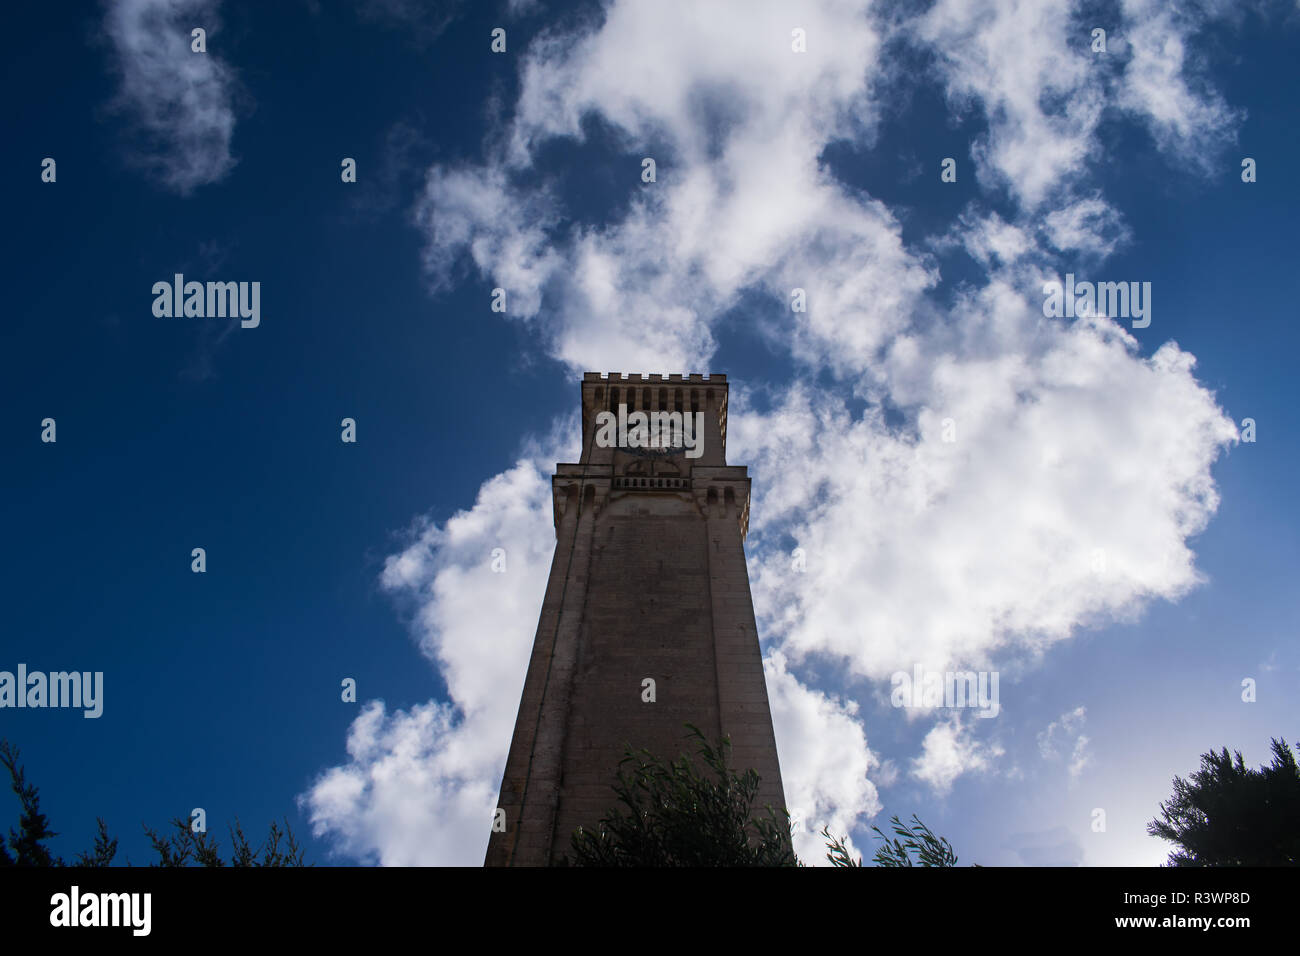 Feeling small while looking up at the Baroque style clock tower located in Mtarfa, Malta. Stock Photo